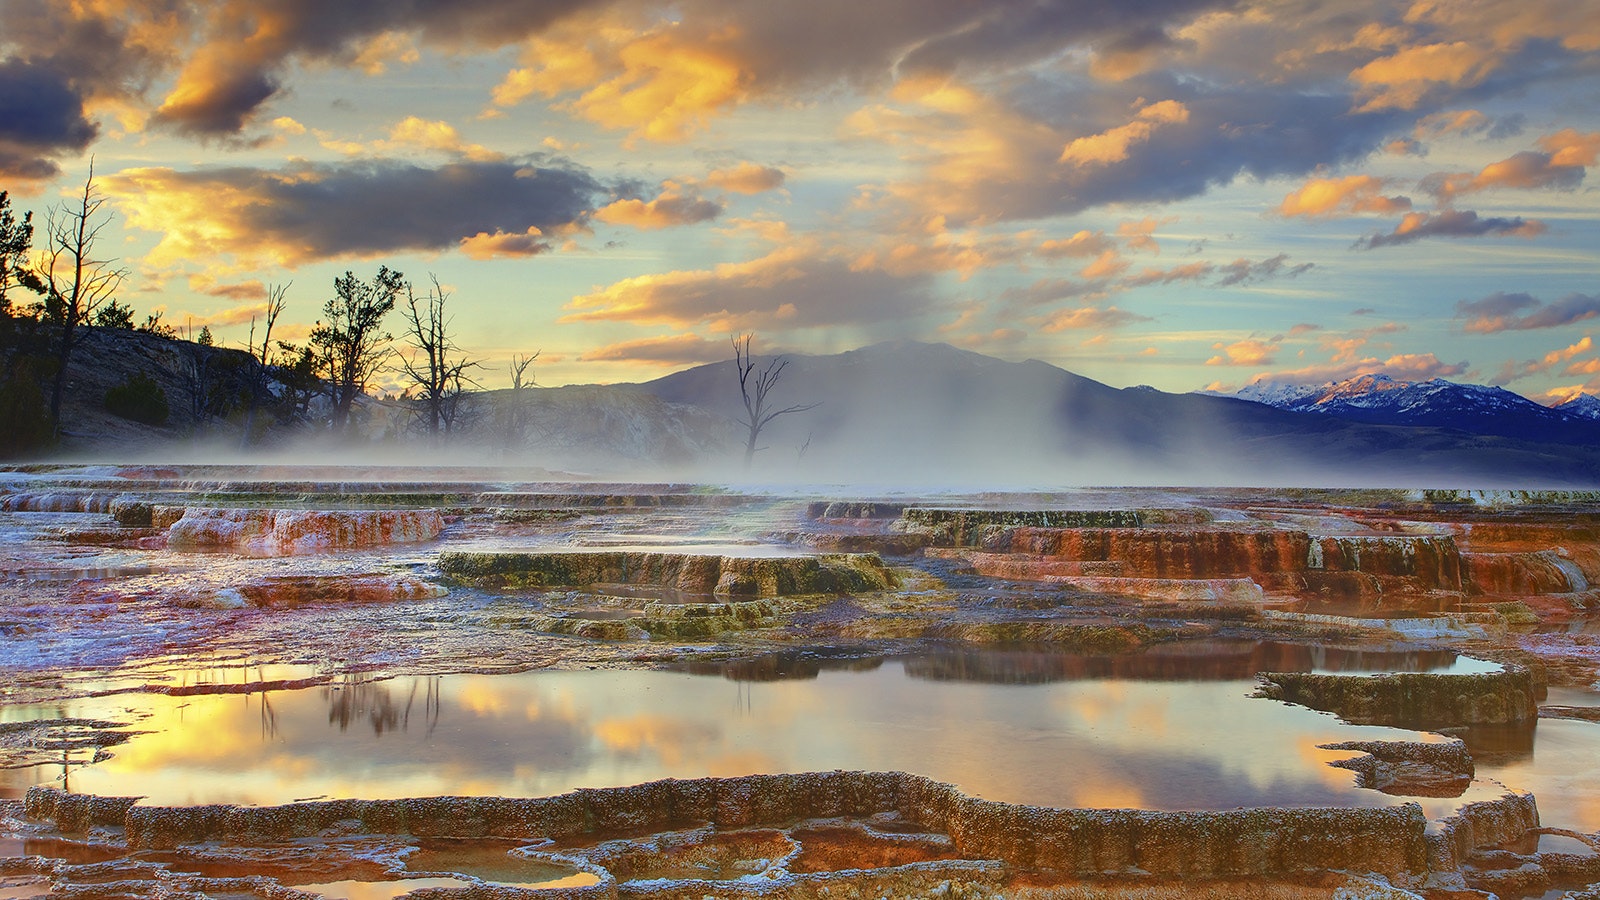 Yellowstone is a hotbed for geothermal activity, like Mammoth Hot Springs pictured here. But developing geothermal elsewhere in Wyoming still is more theoretical than practical.